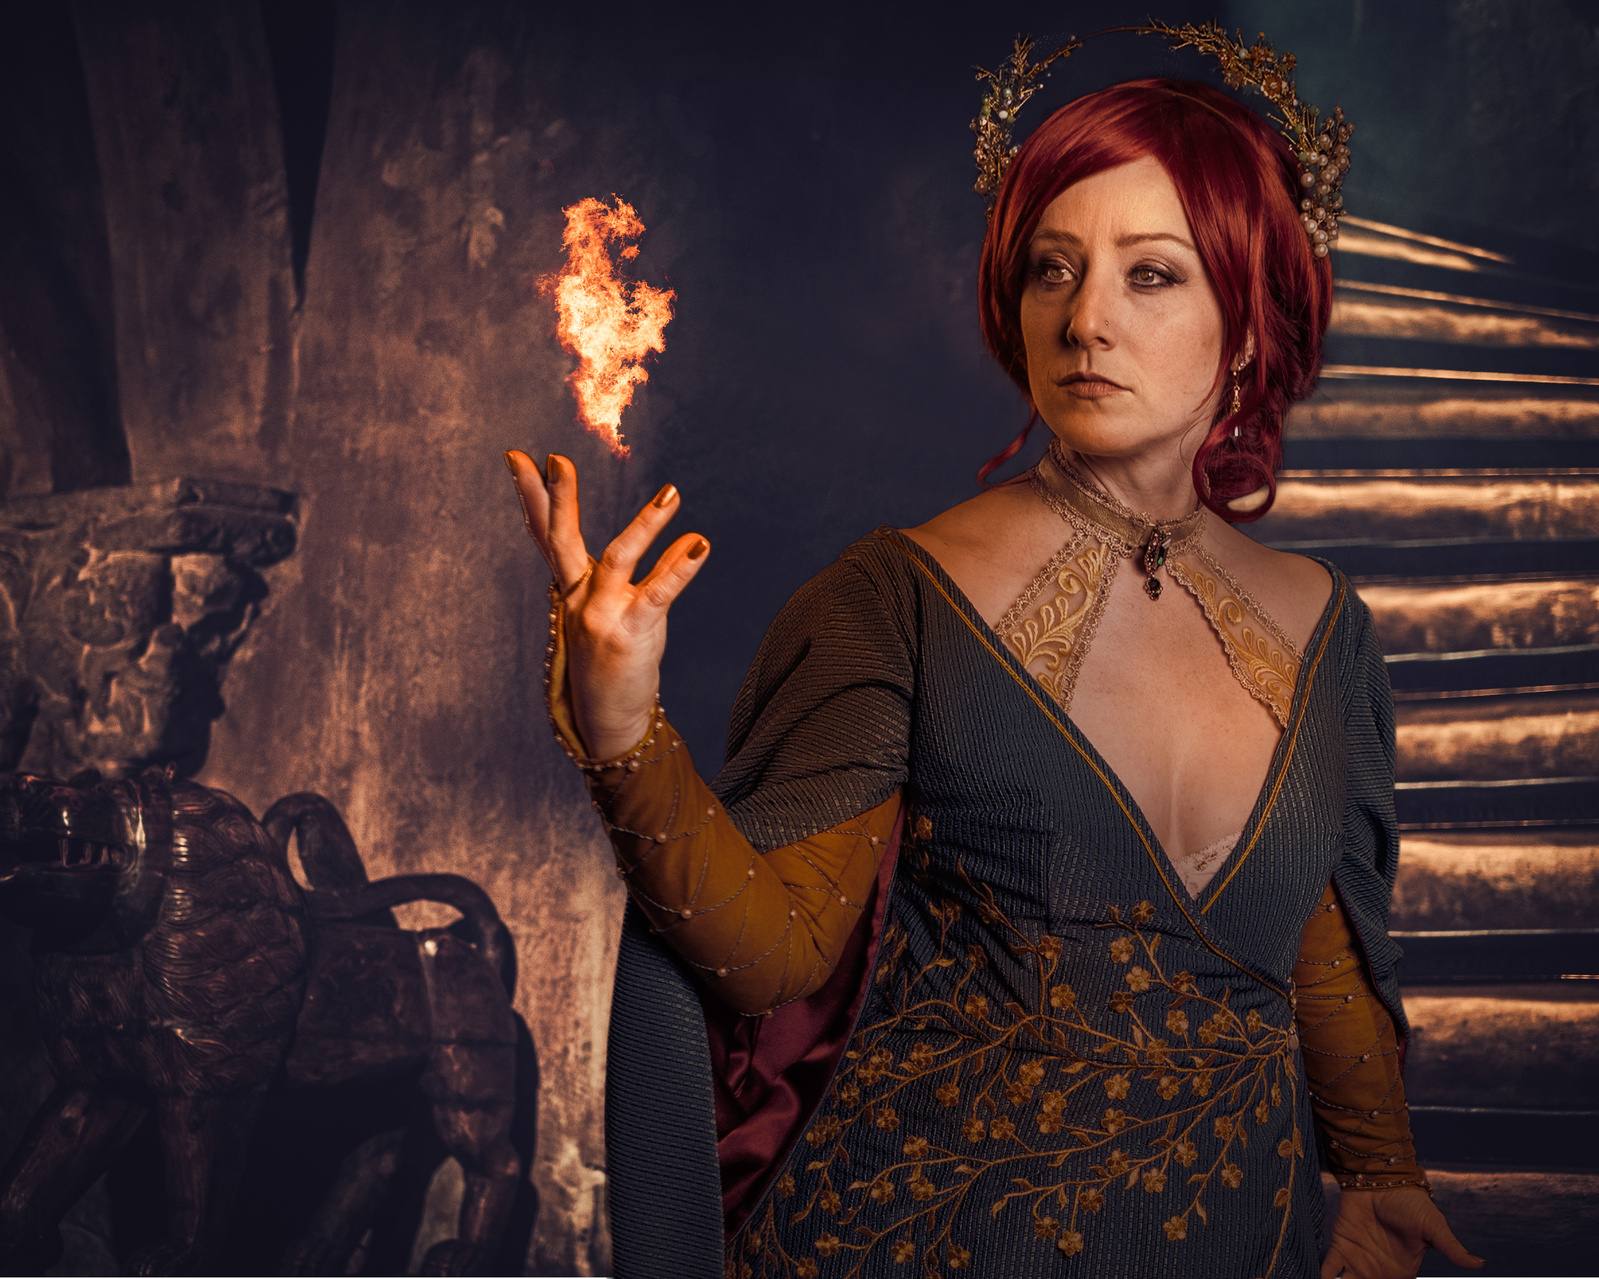 A digital artistry image and a magical scene of a woman with red hair and green and gold dress with her hand up from which extends a flame